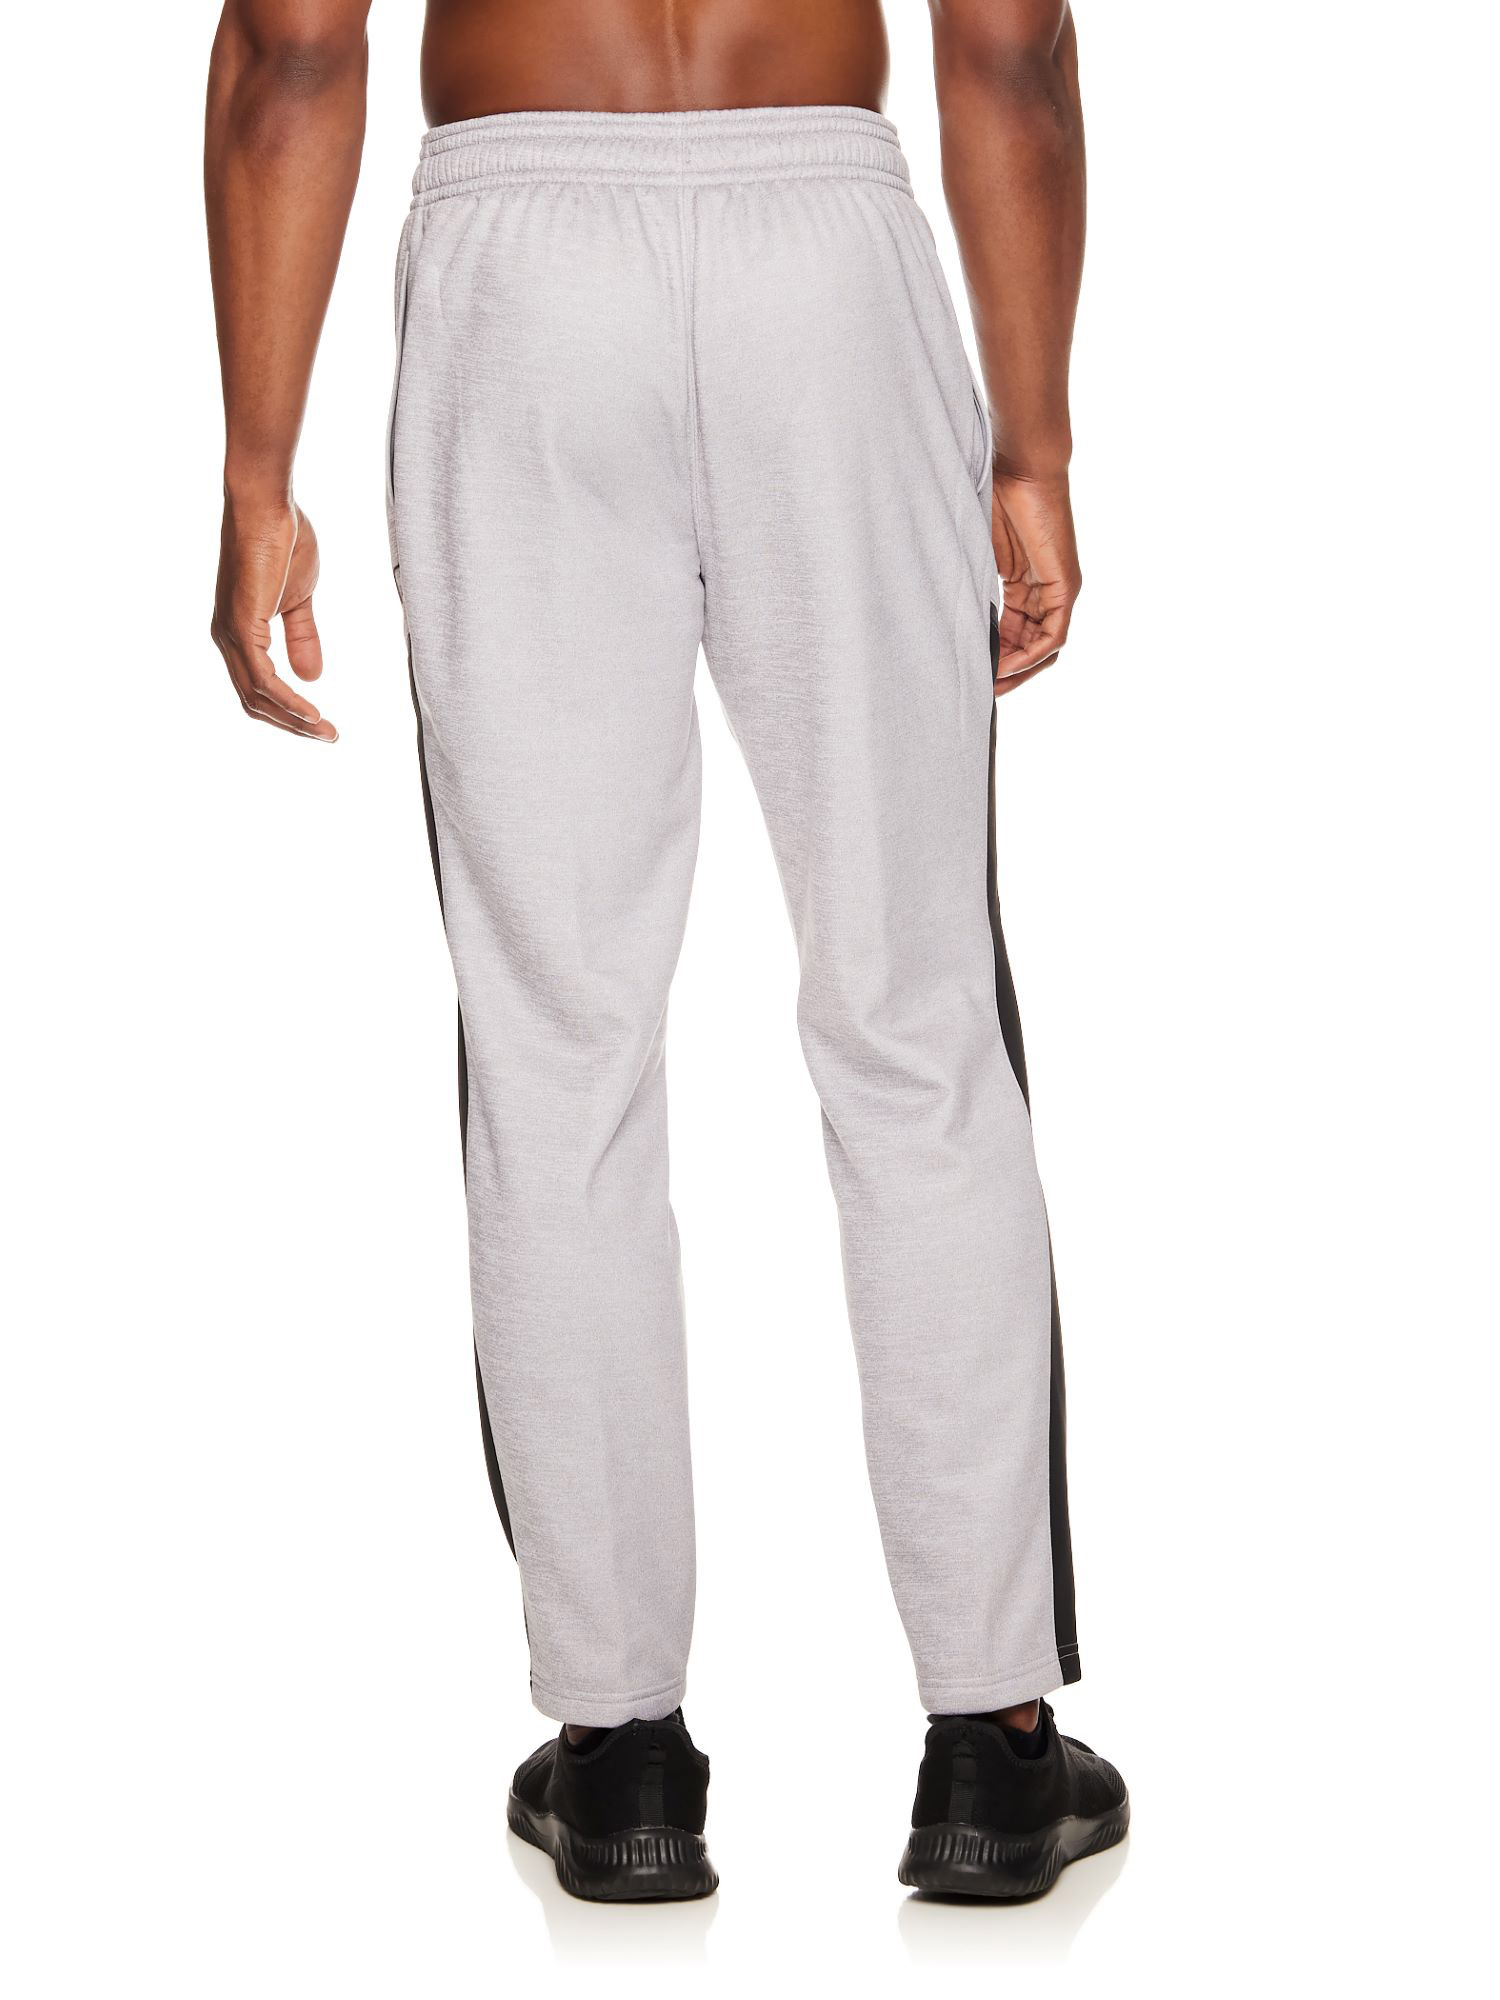 And1 Men's and Big Men's Deflection Pants, Sizes S-5X - image 2 of 4